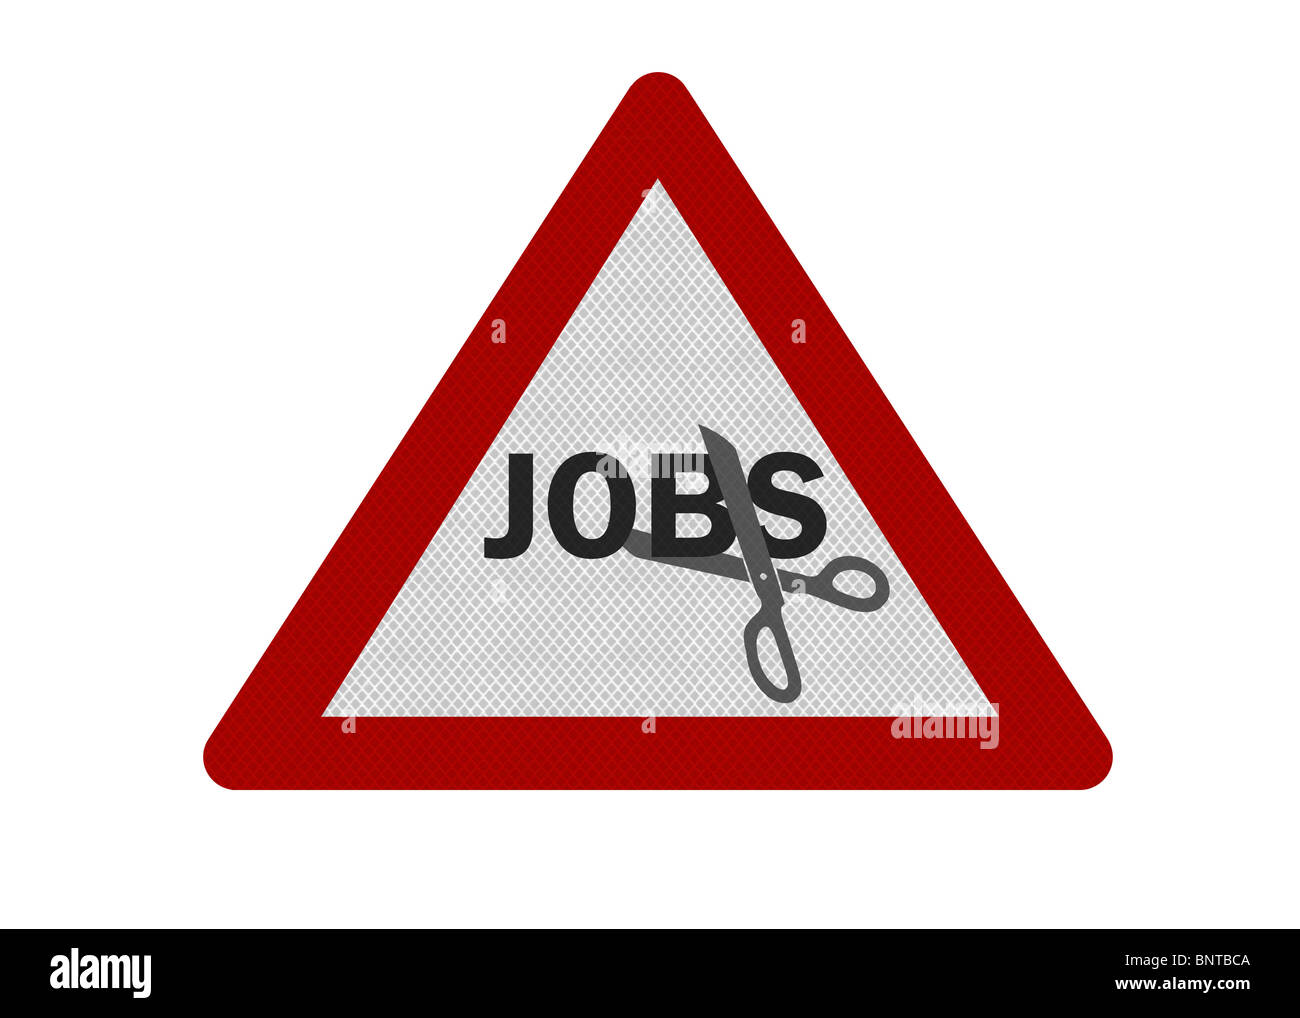 Political issues series: Photo realistic reflective metallic 'jobs cuts' sign, isolated on a pure white background. Stock Photo